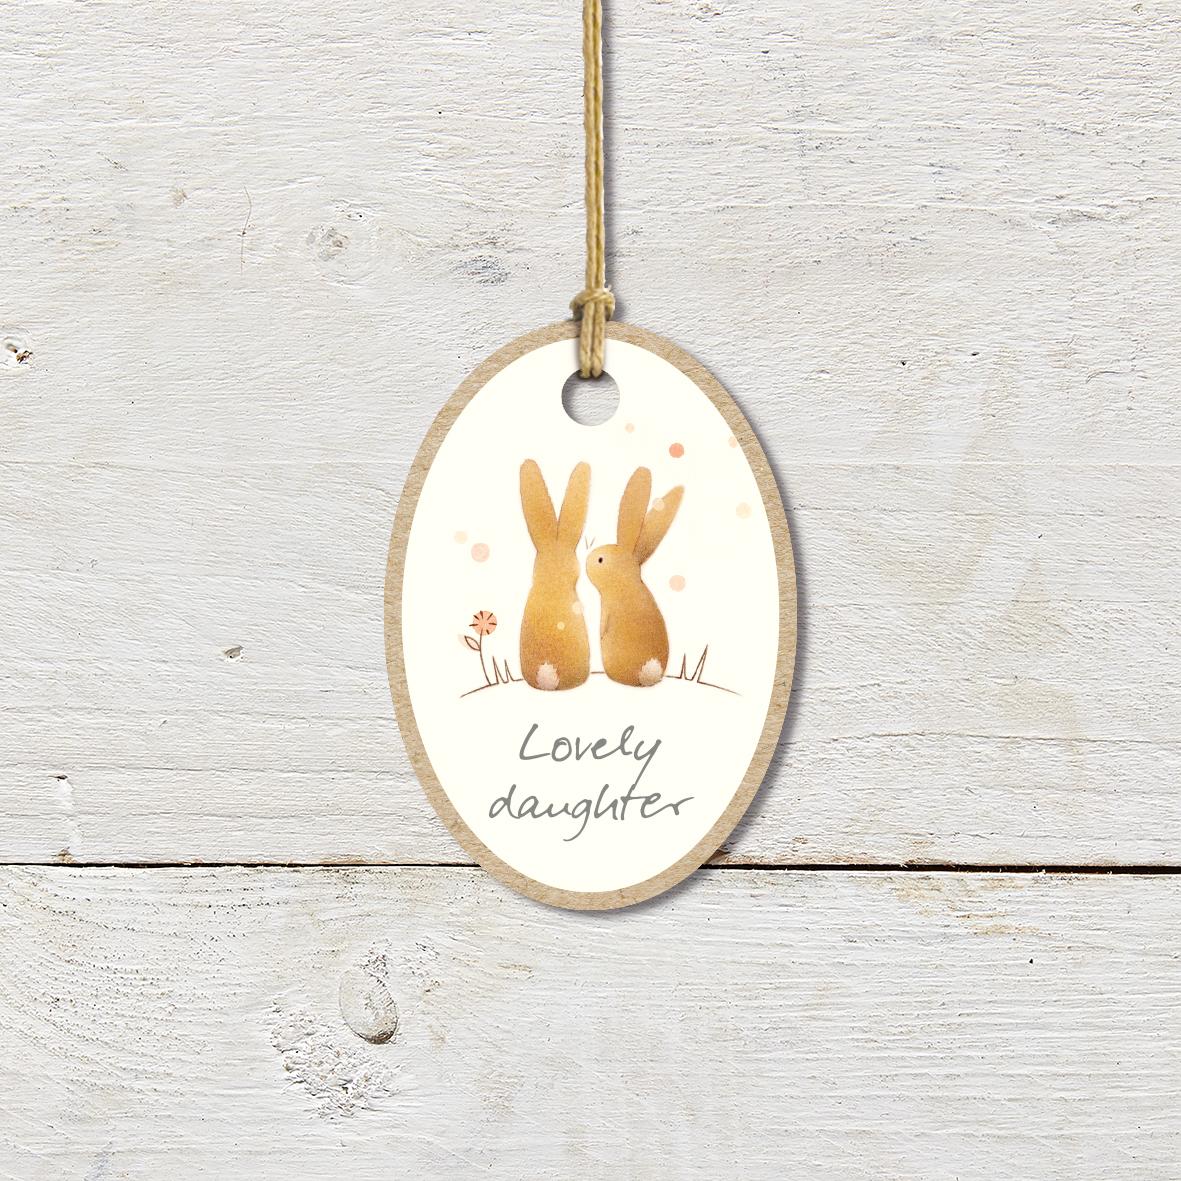 Small Wooden Keepsake Plaque/Tag featuring two cute rabbits with a ’Lovely Daughter’ caption.